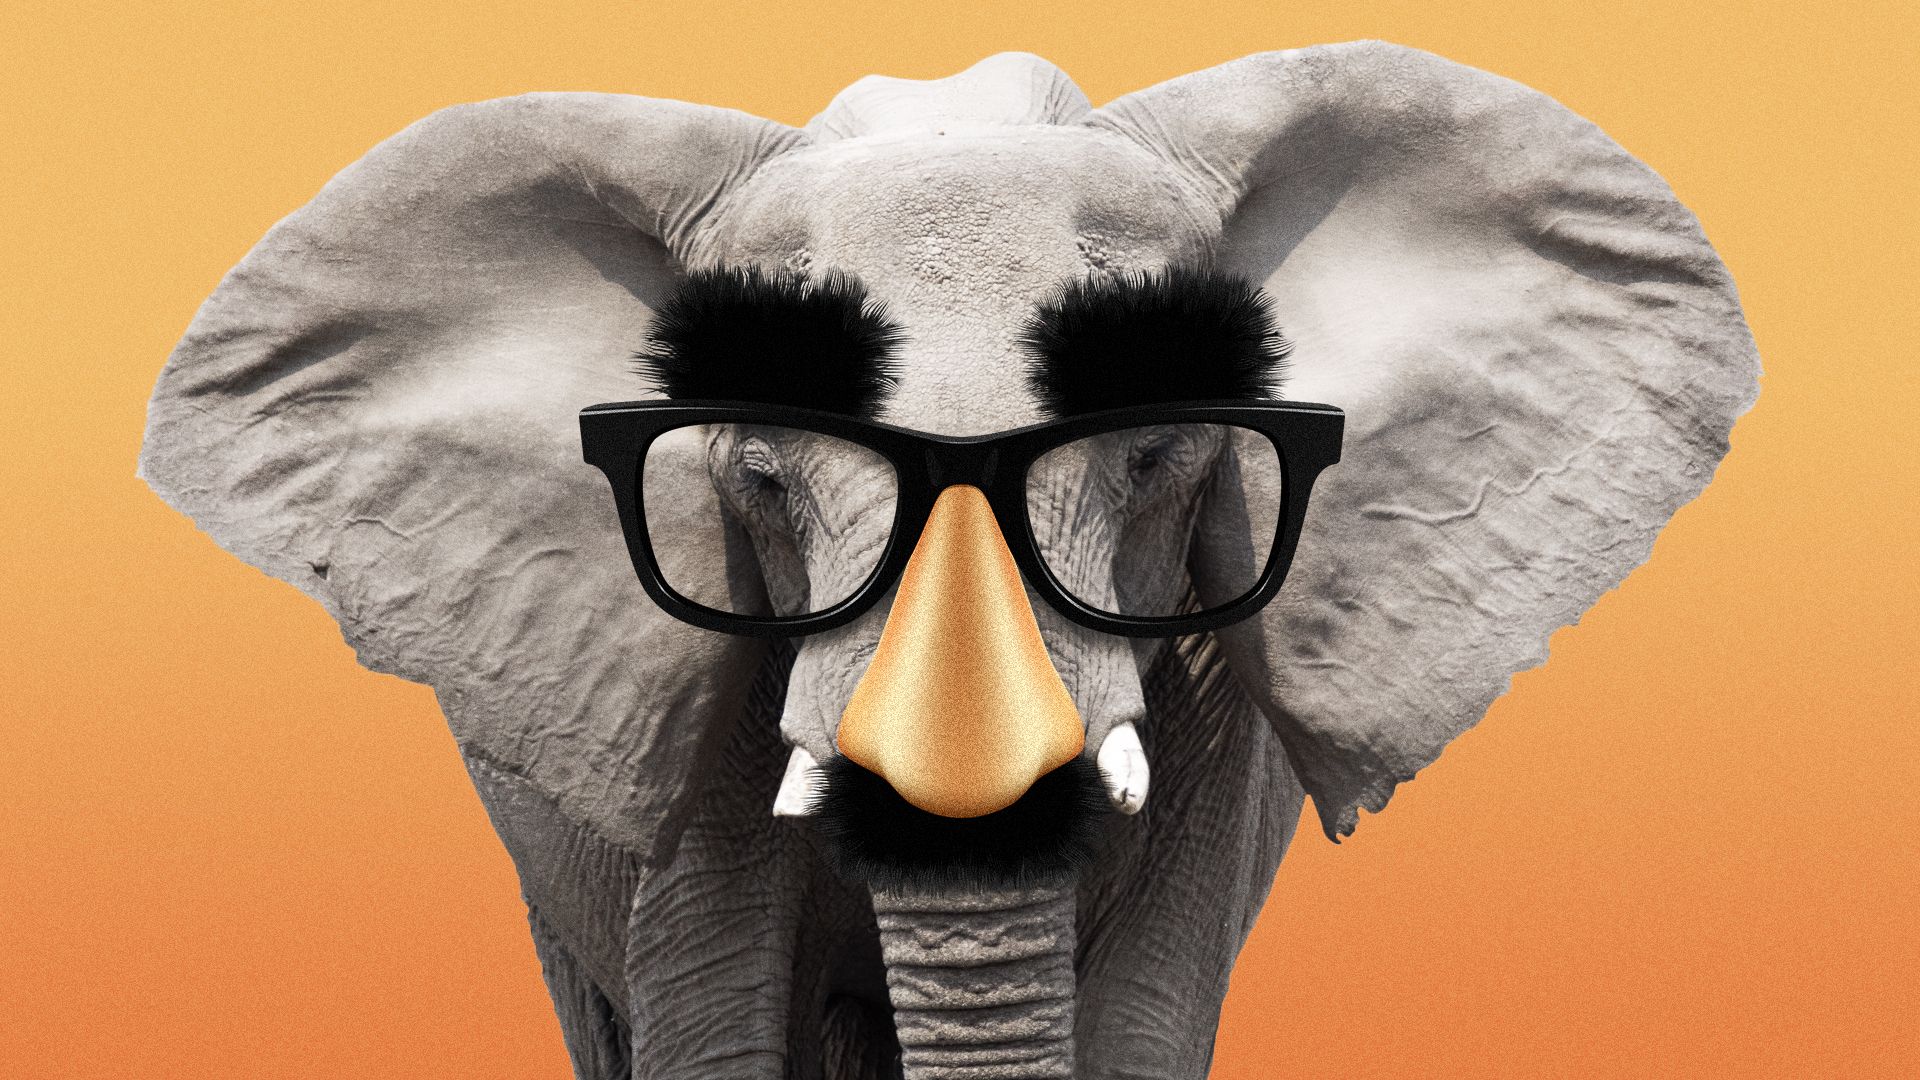 Illustration of an elephant wearing Groucho glasses.